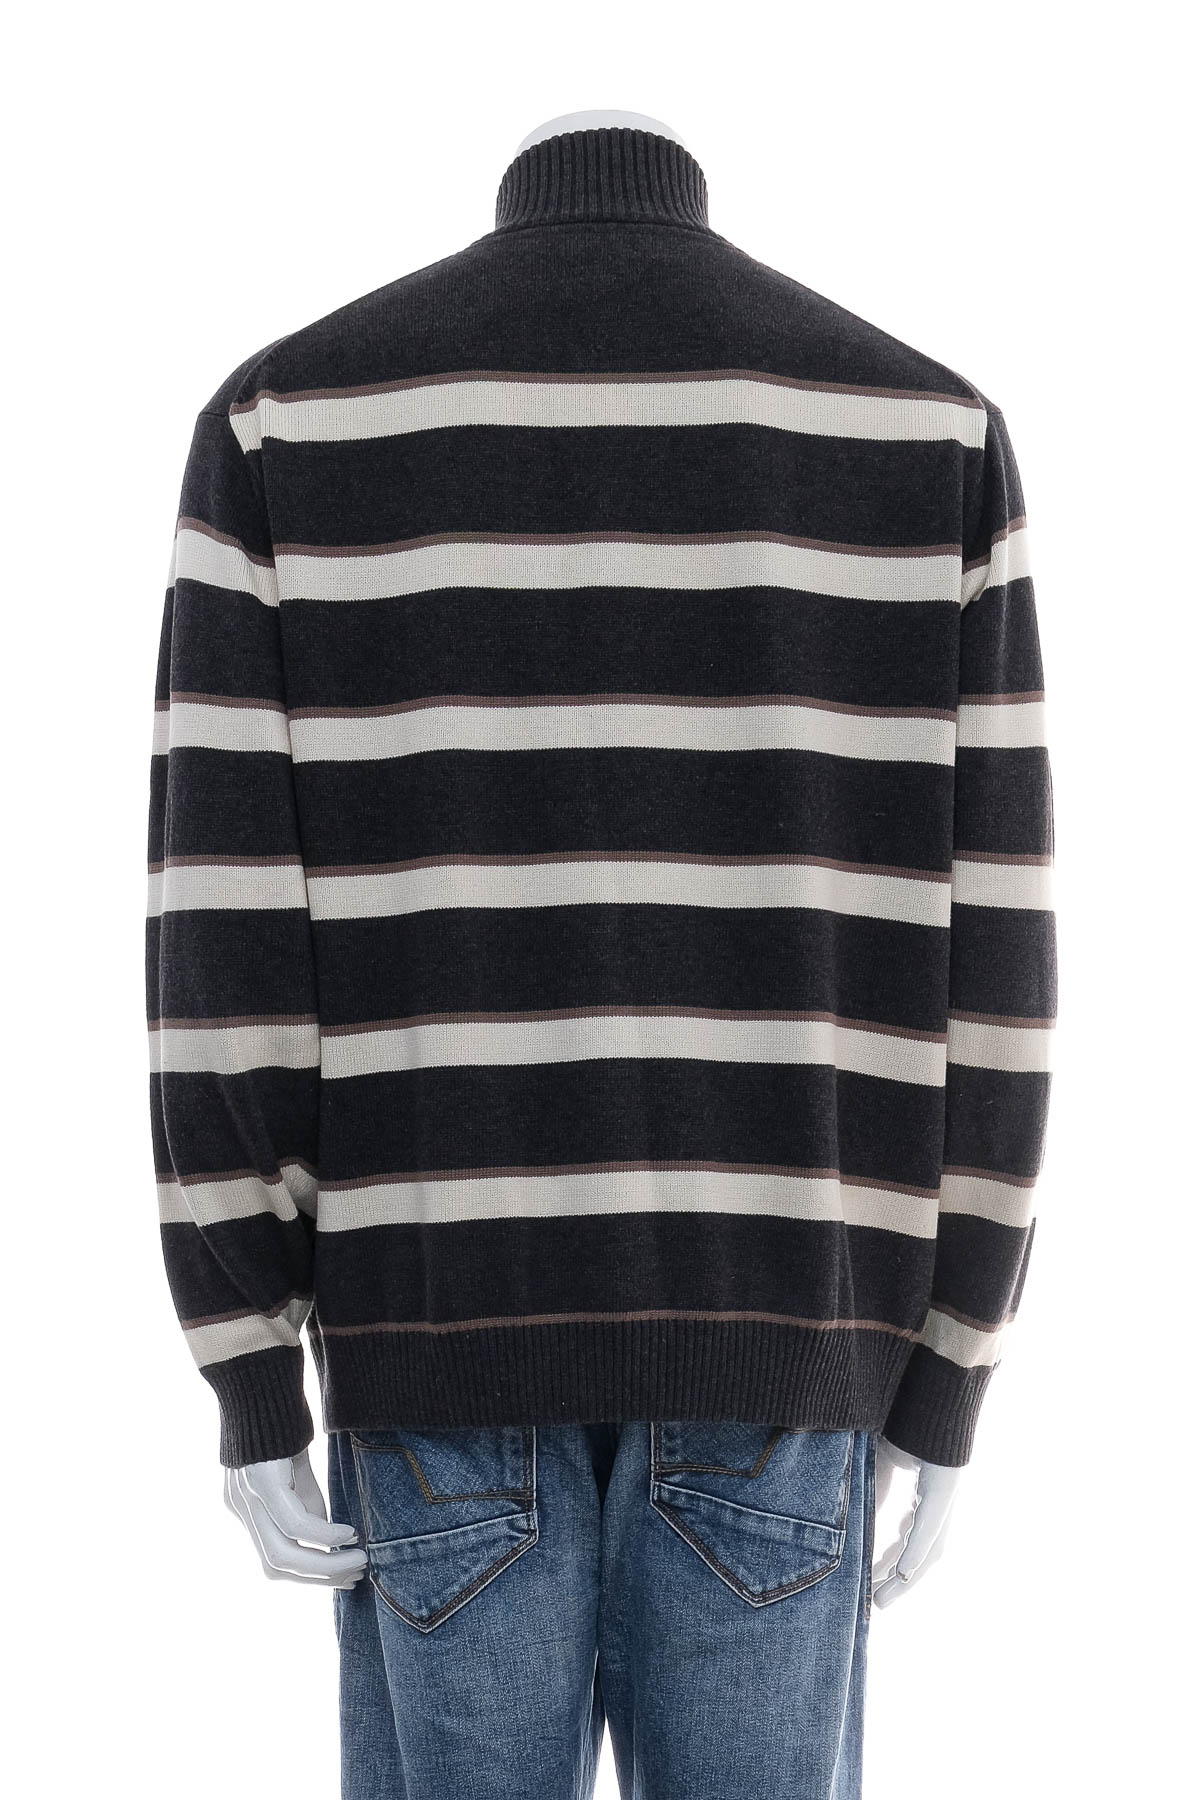 Men's sweater - Peter Fitch - 1